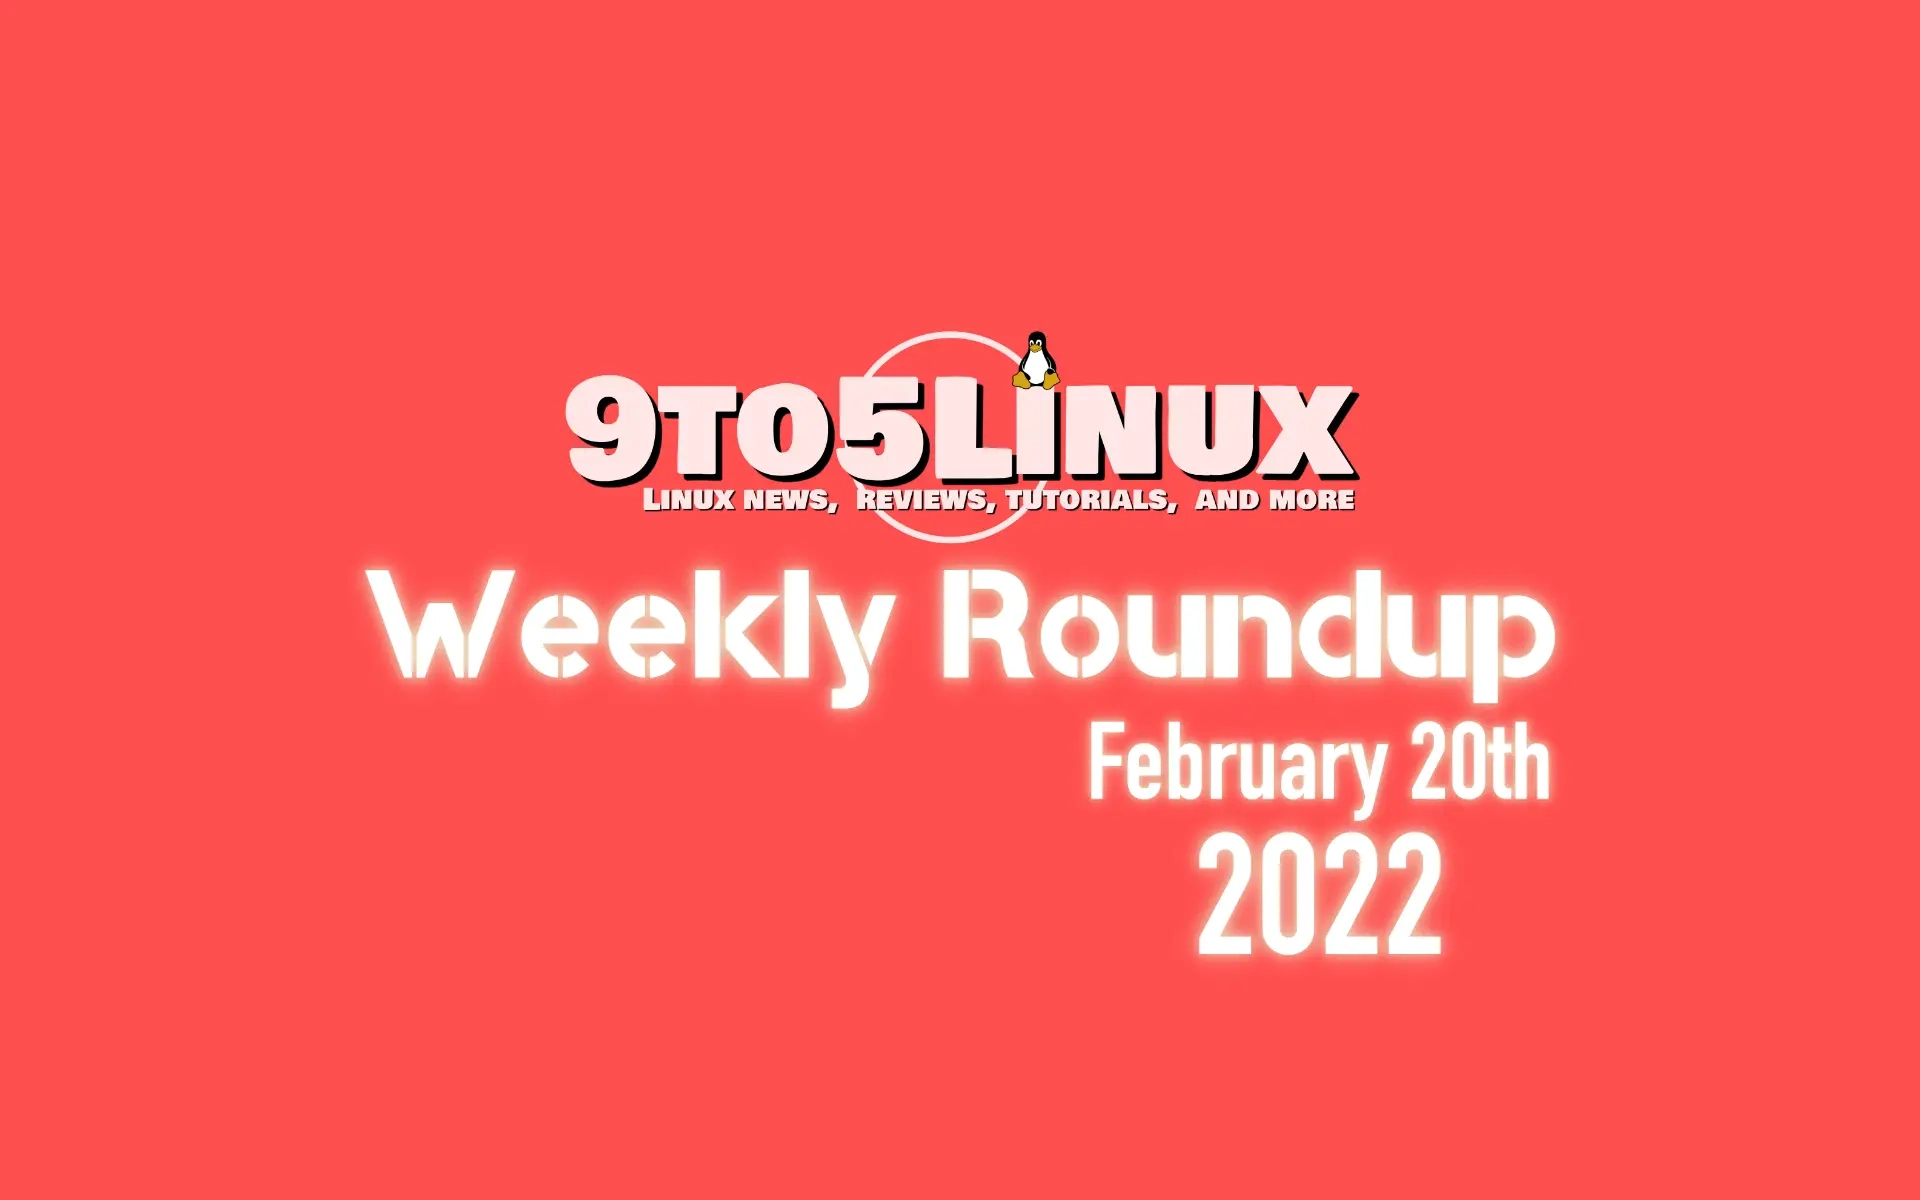 9to5Linux Weekly Roundup: February 20th, 2022